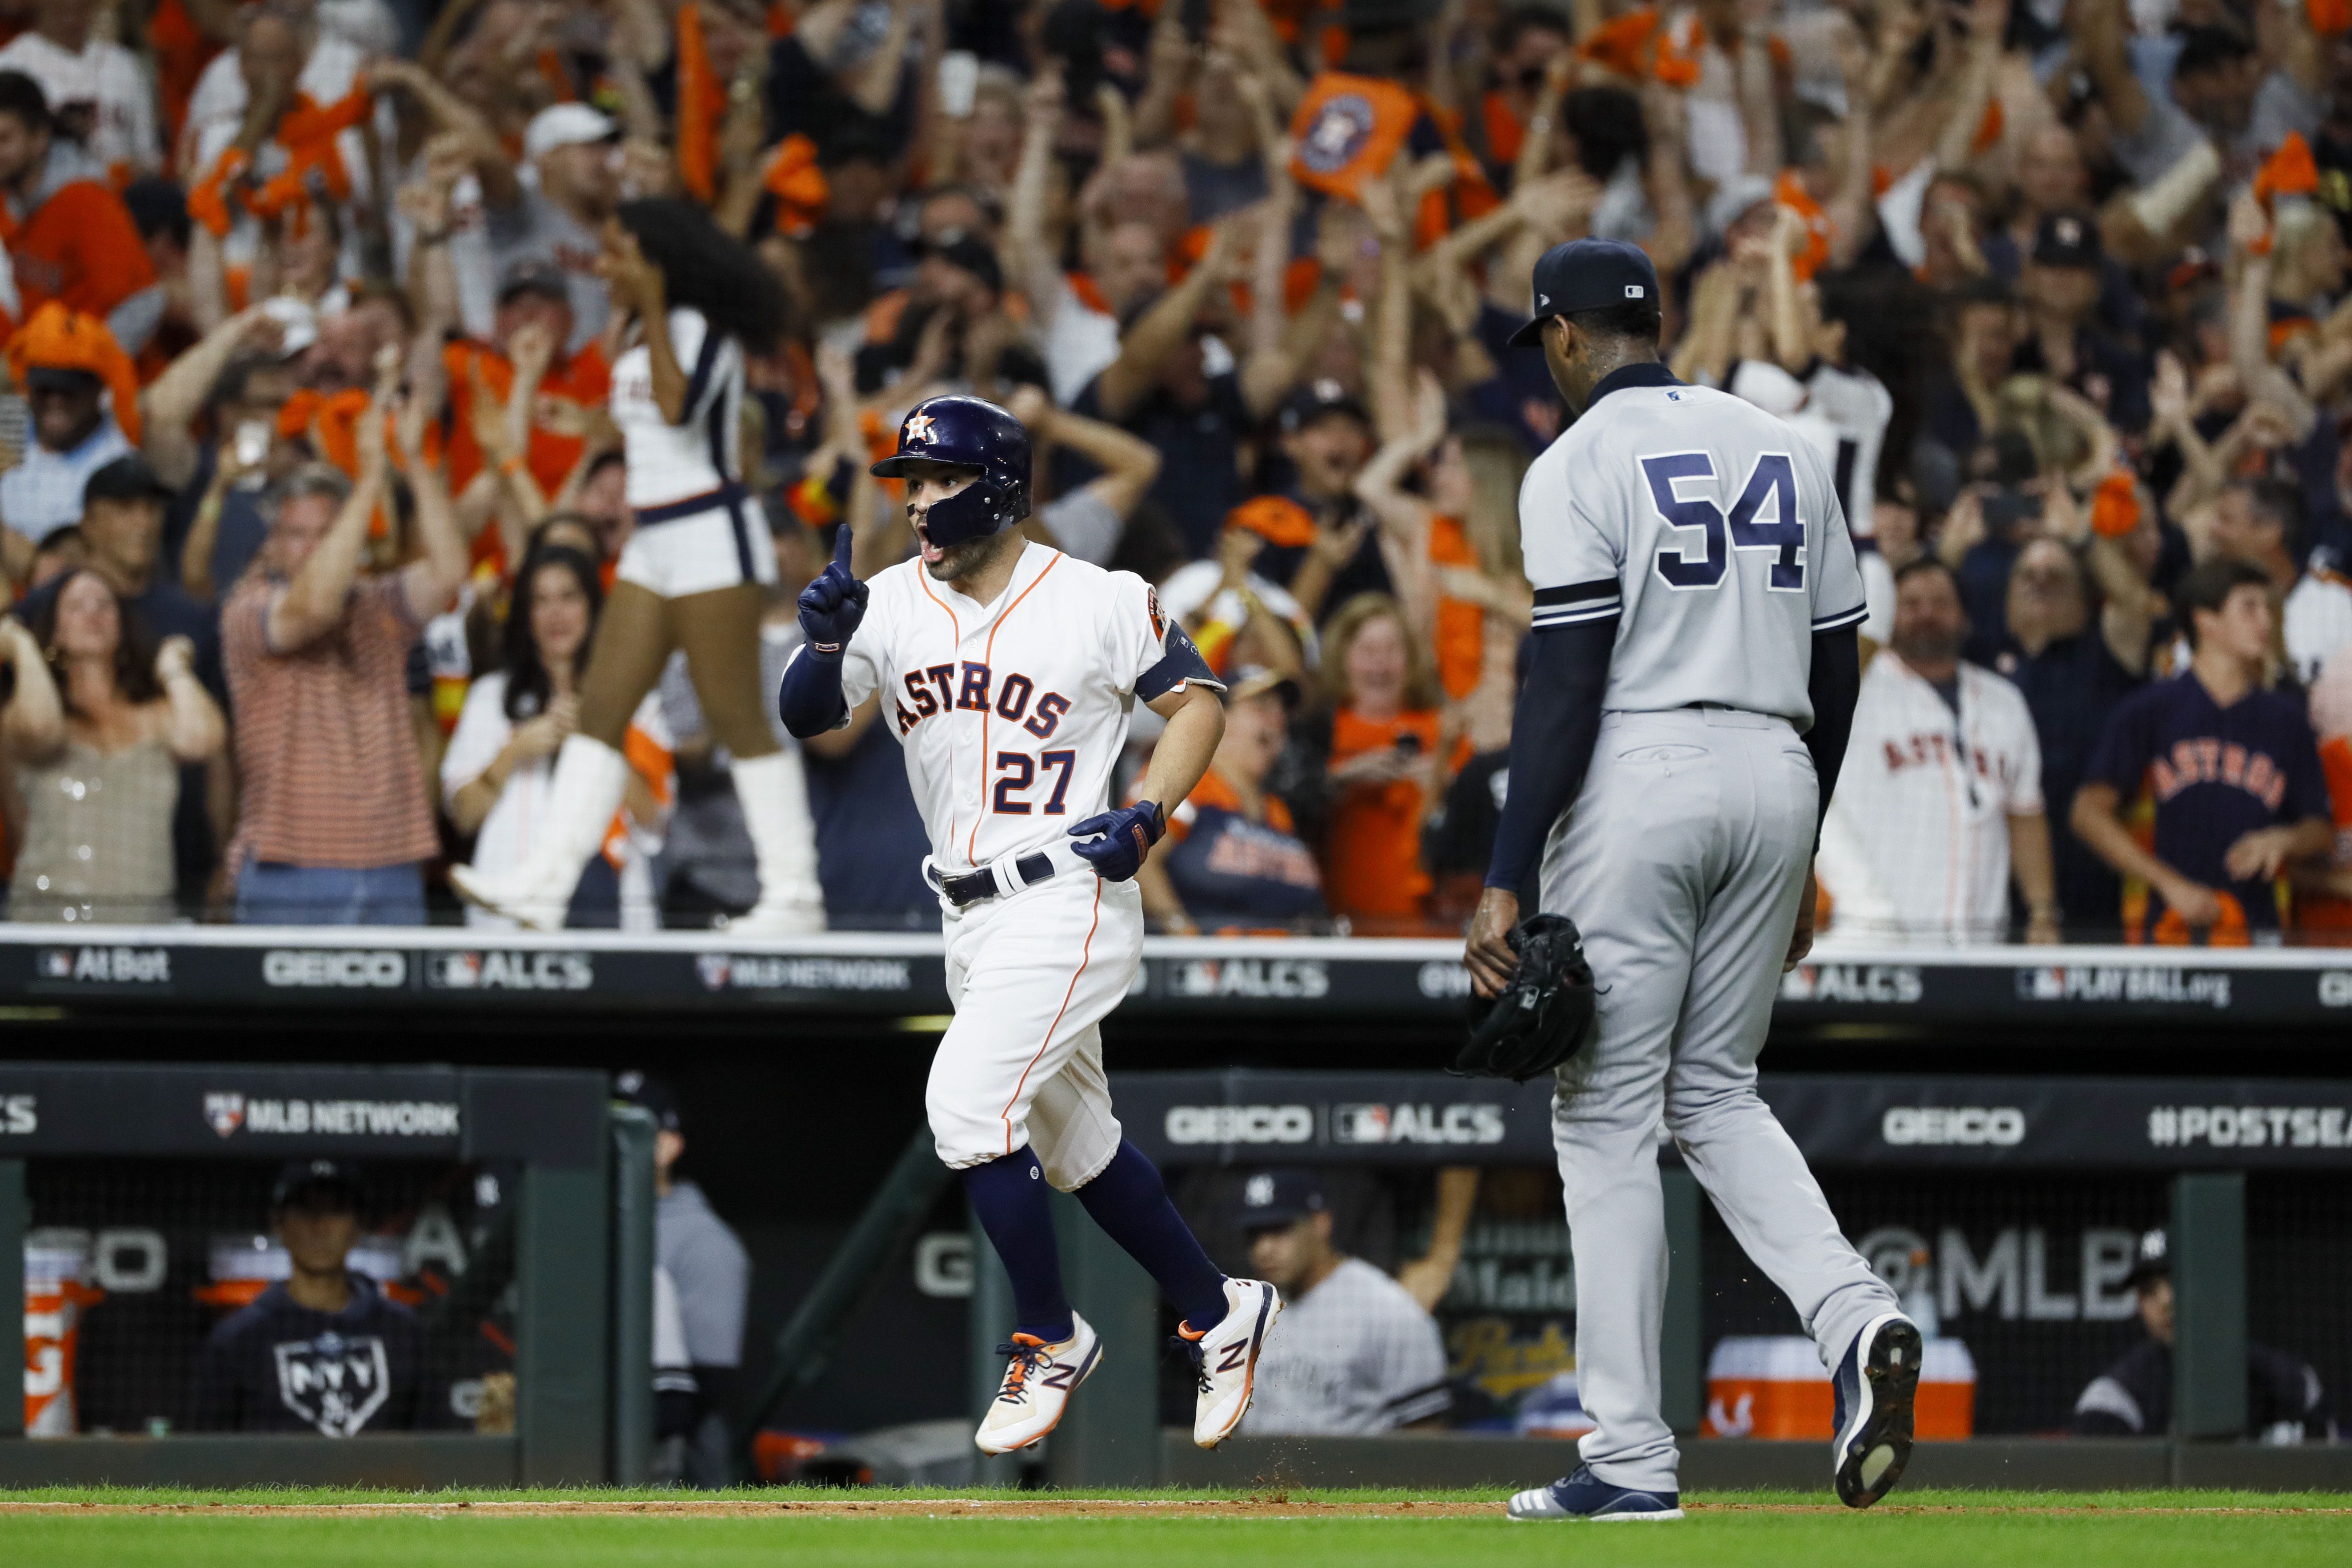 Jose Altuve 'Don't rip off my jersey' ALCS statement in question 